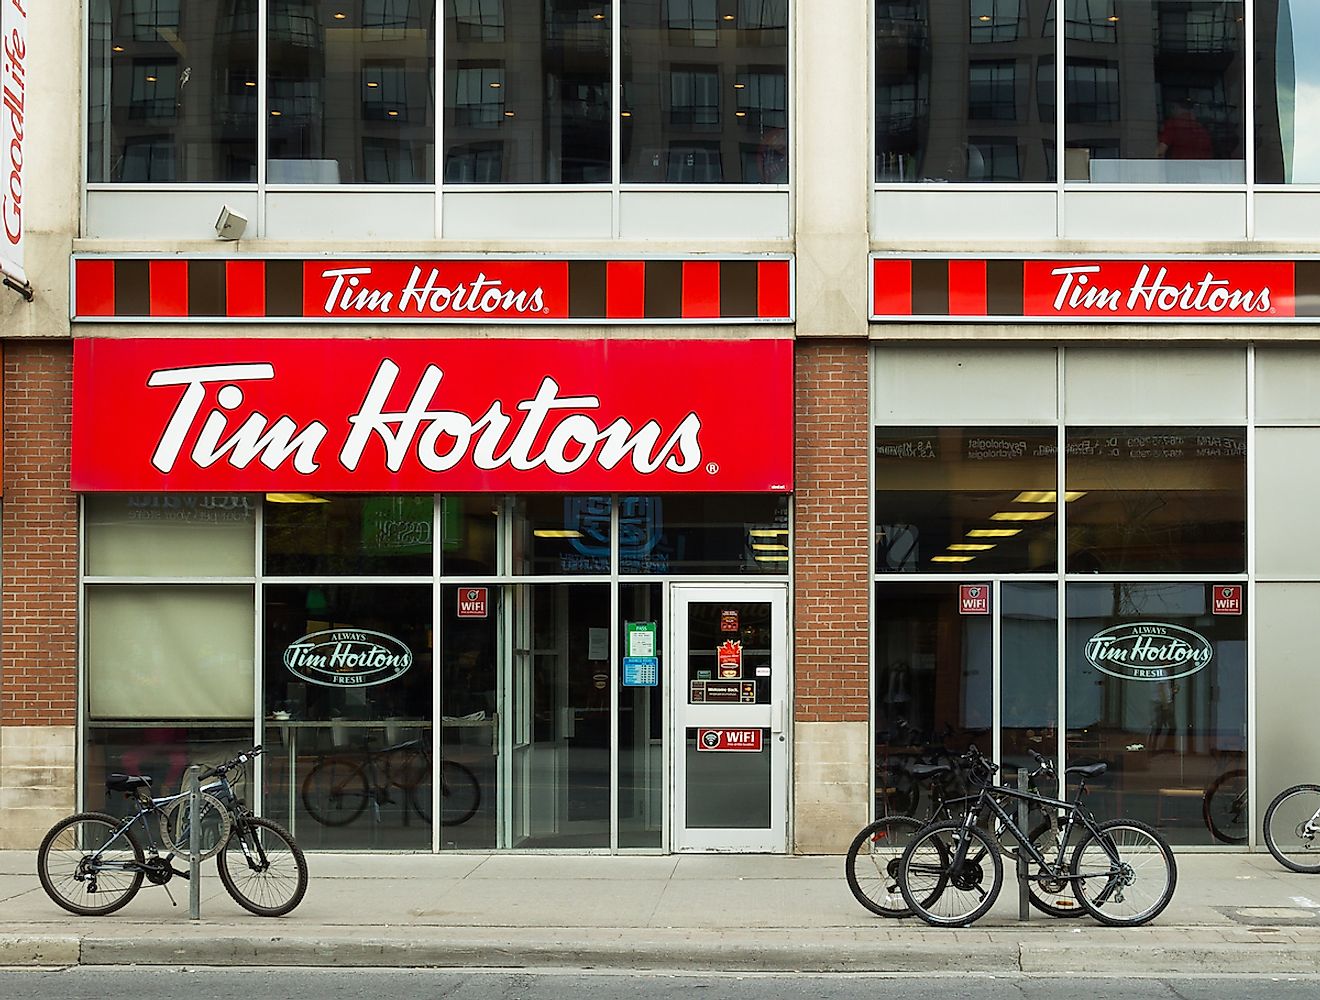 The outside of a Tim Hortons Coffee Shop in Canada. Image credit: Mikecphoto/Shutterstock.com